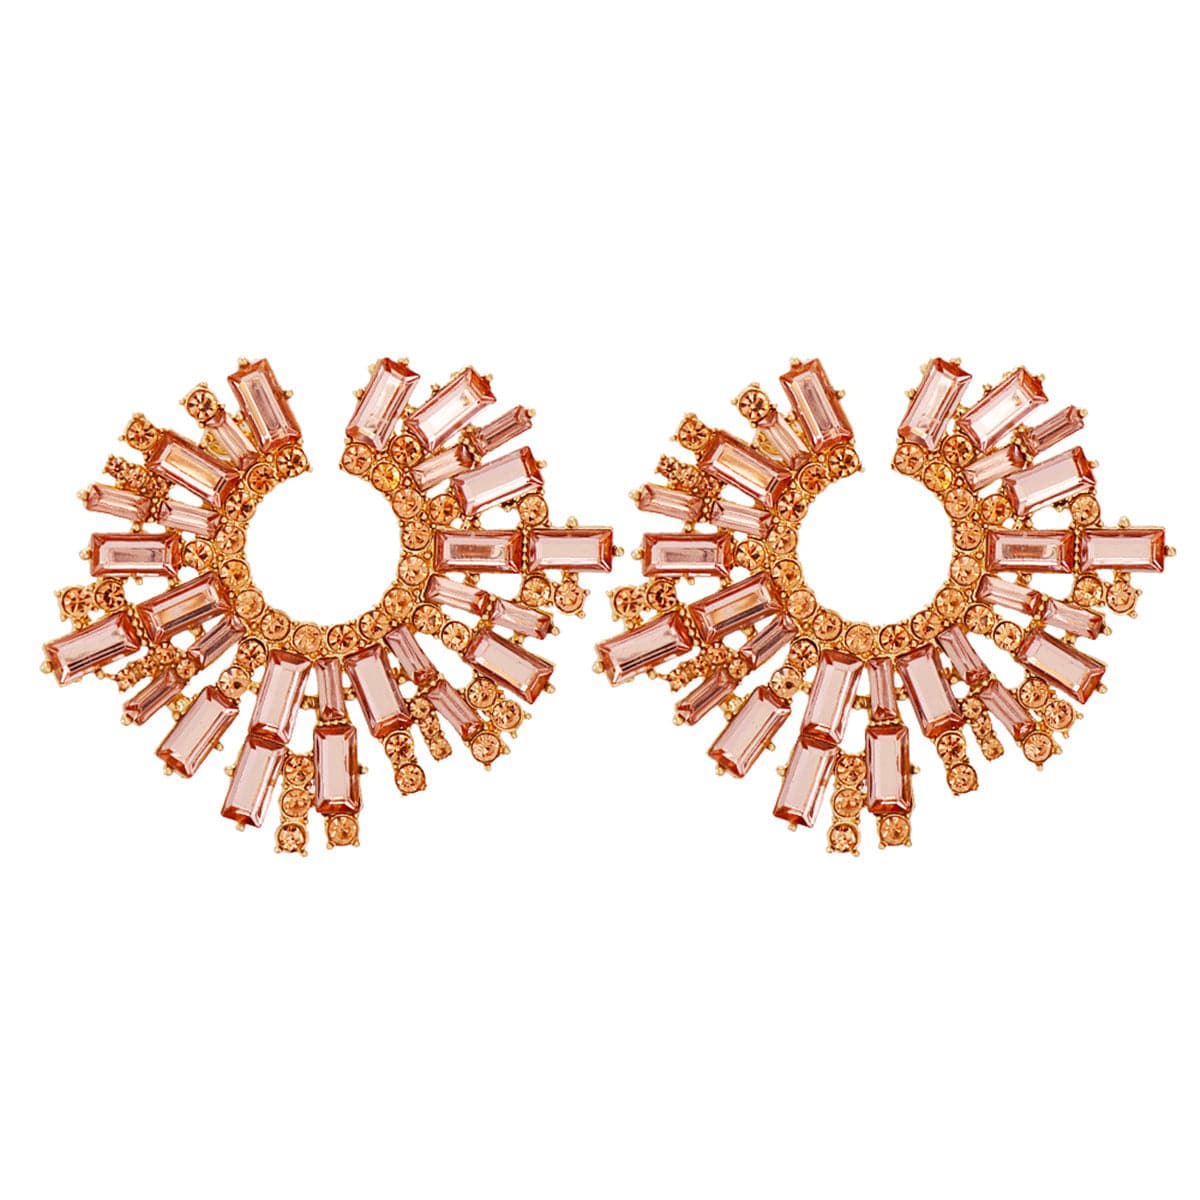 Champagne Cubic Zirconia & 18K Gold-Plated Geometric Cluster Stud Earrings